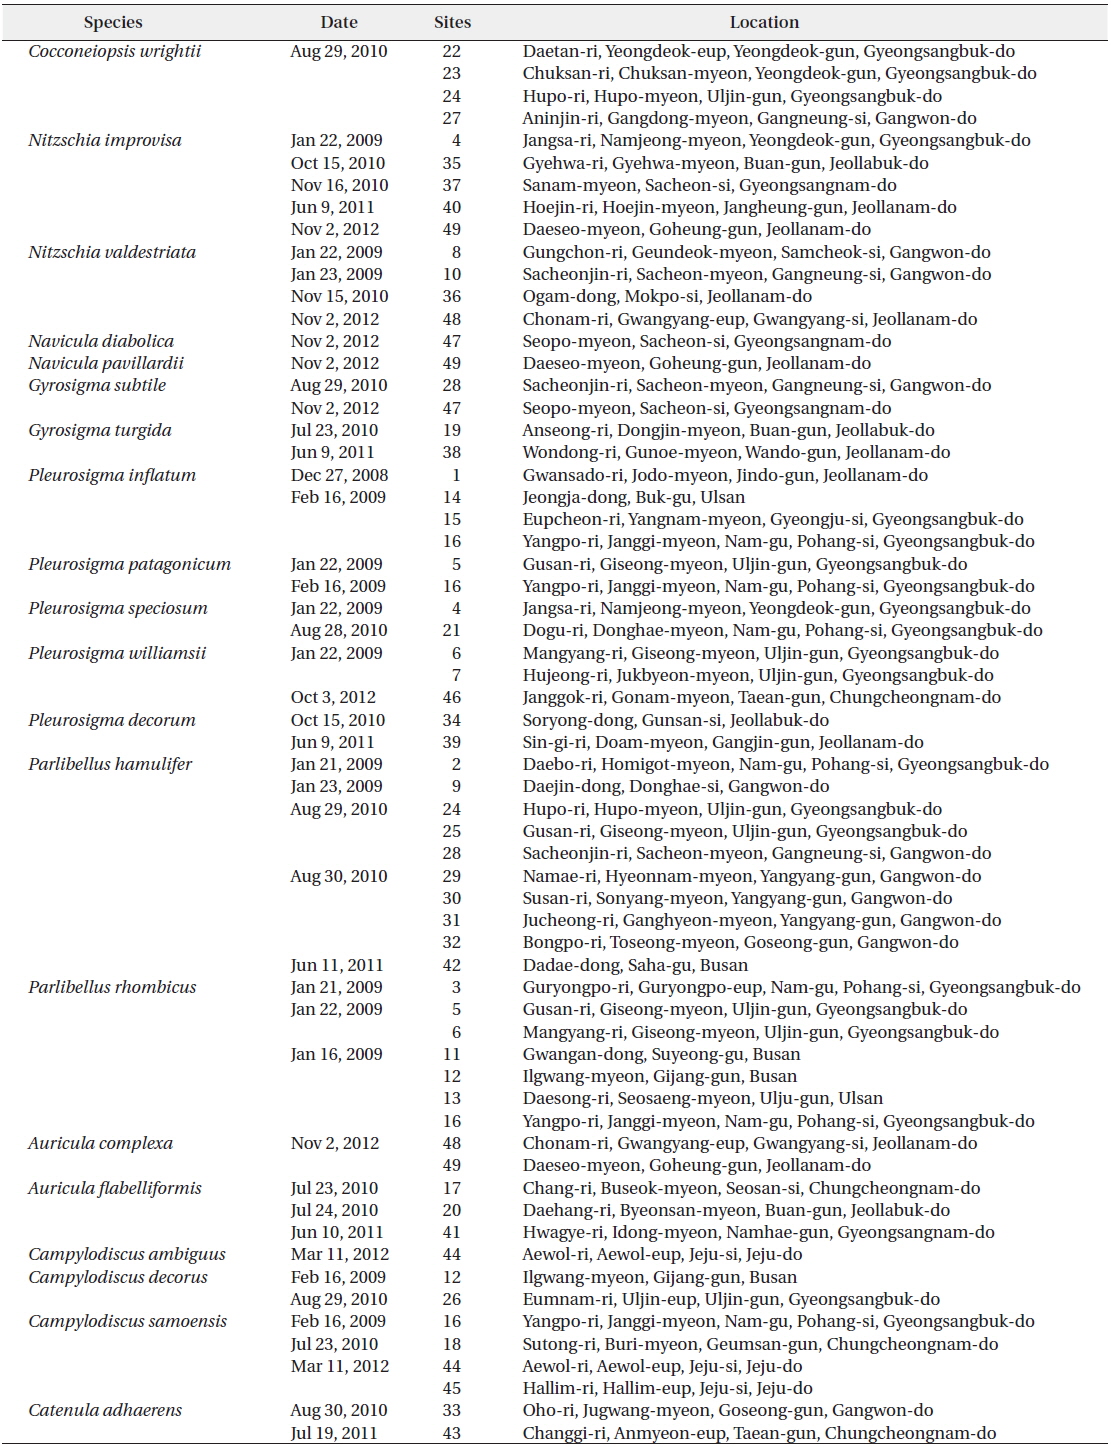 Check list of new recorded diatoms in this study